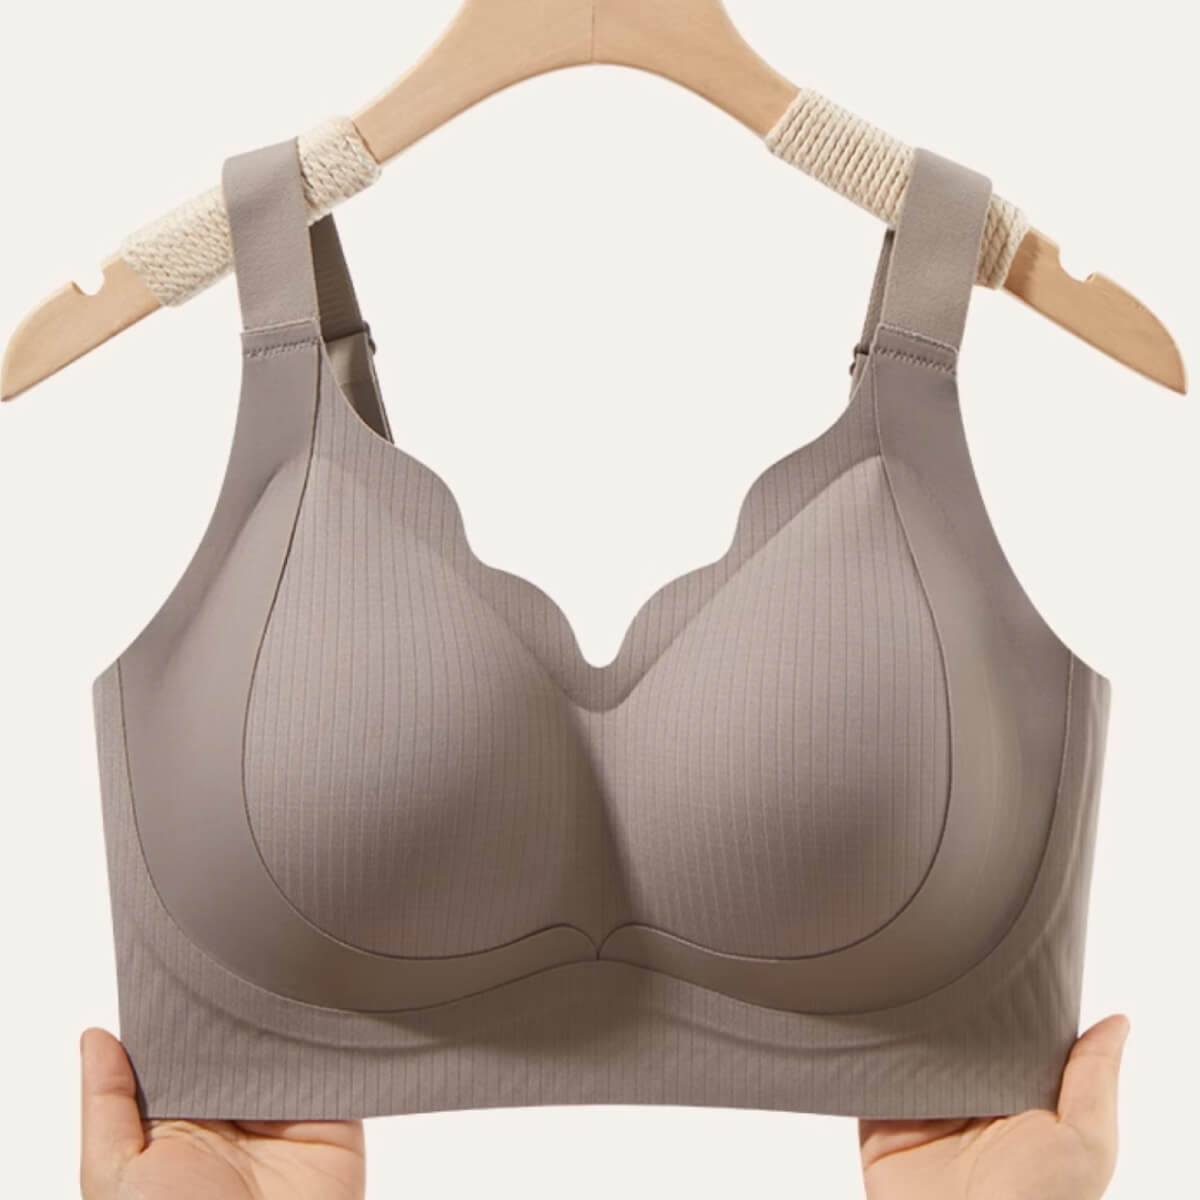 Seamless No Underwire Sports Bra for Larger Breast